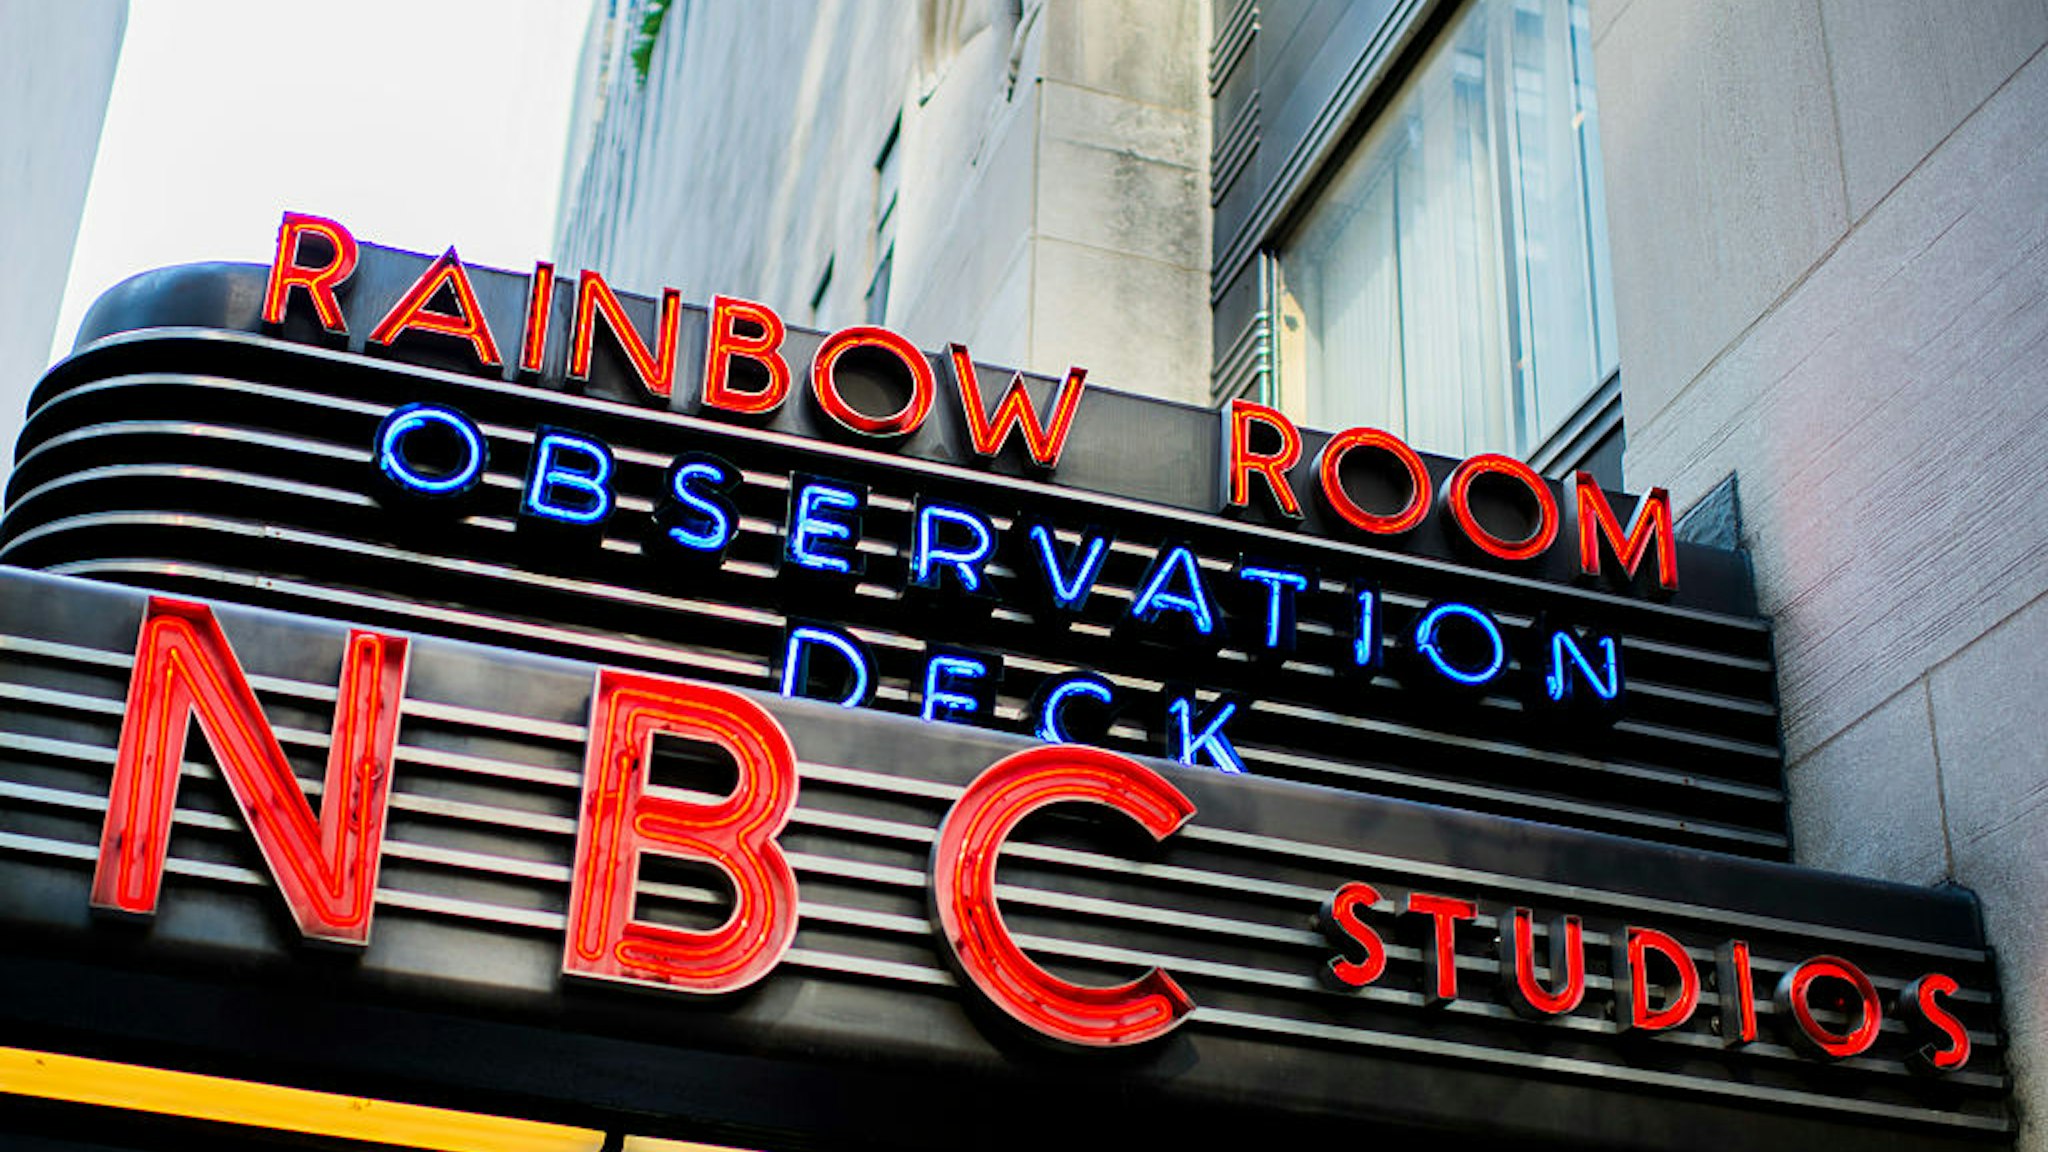 NBC Studios located at the Rockefeller Plaza on June 15 2012 in New York, United States of America.